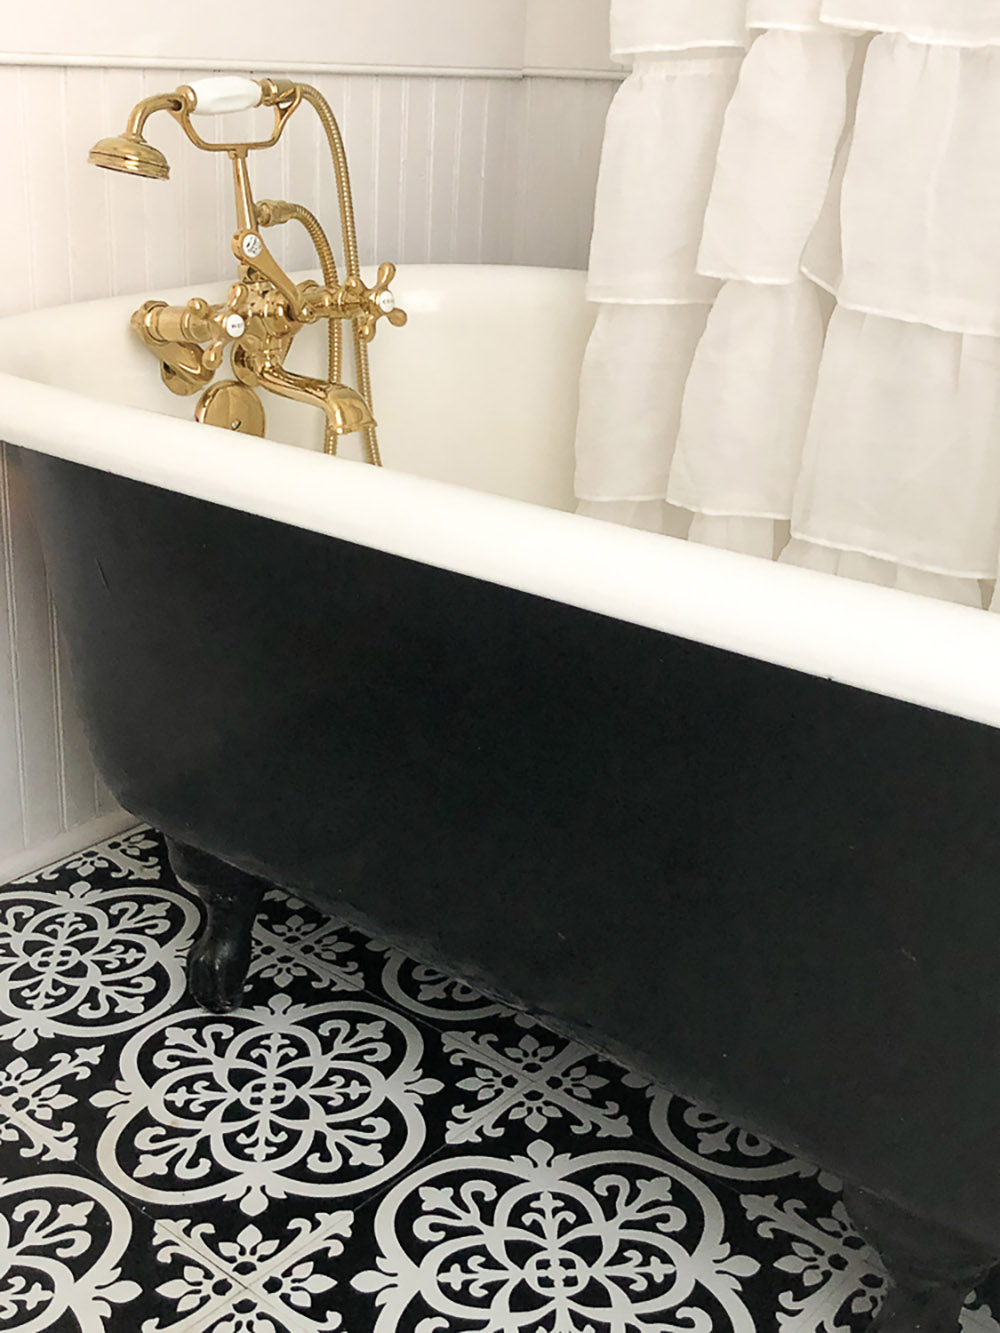 A black and white clawfoot bathtub with a brass faucet.